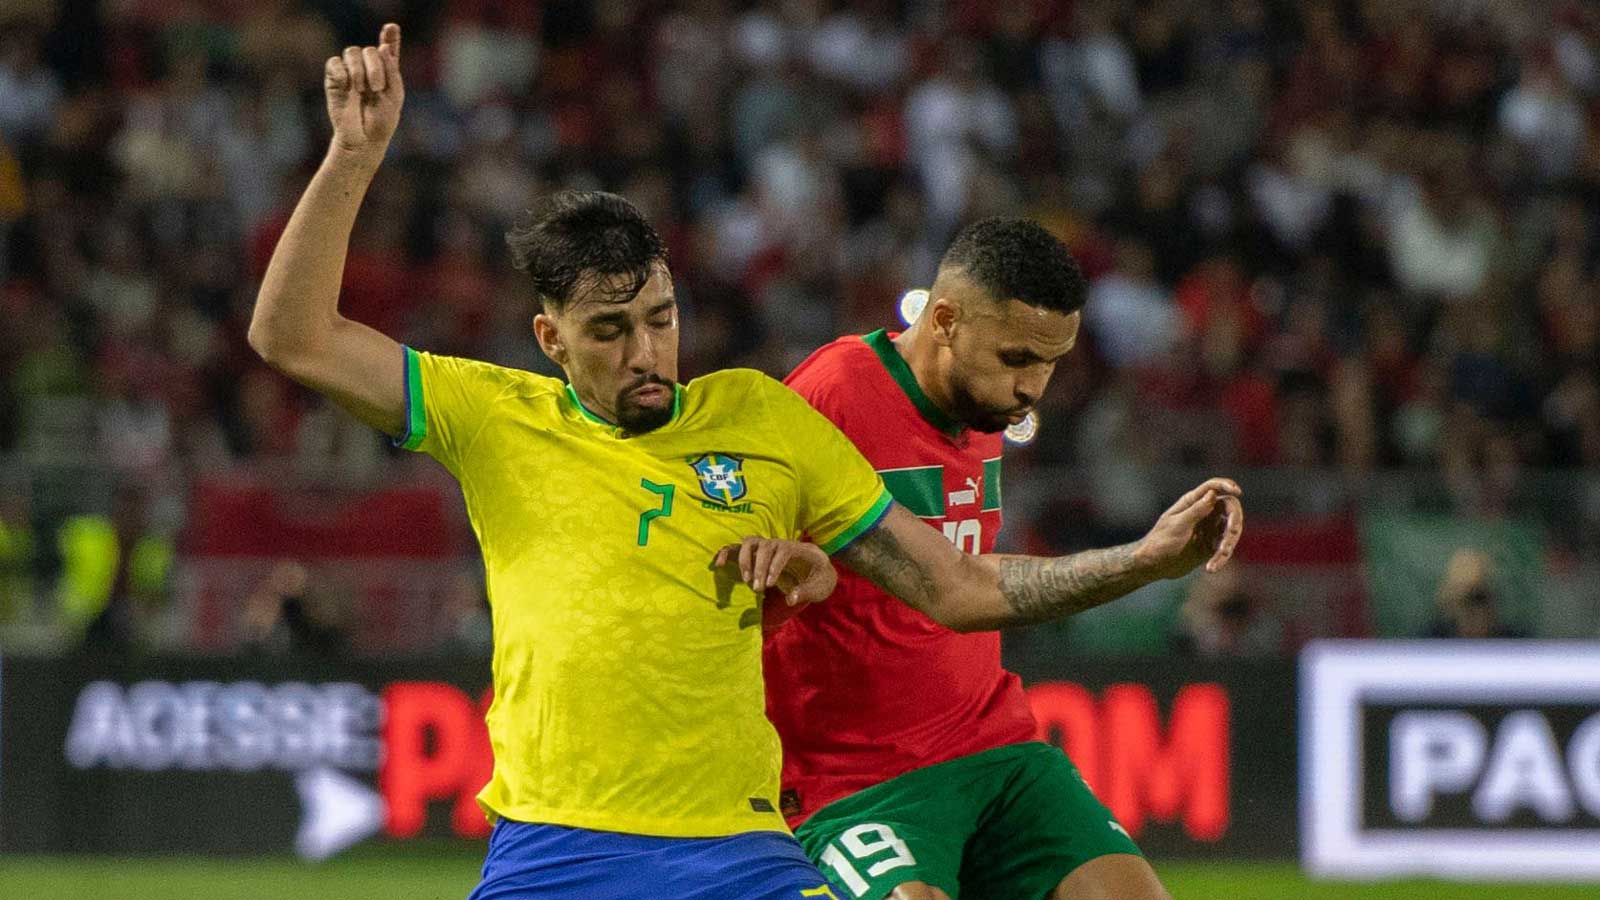 Paquetá in action for Brazil against Morocco